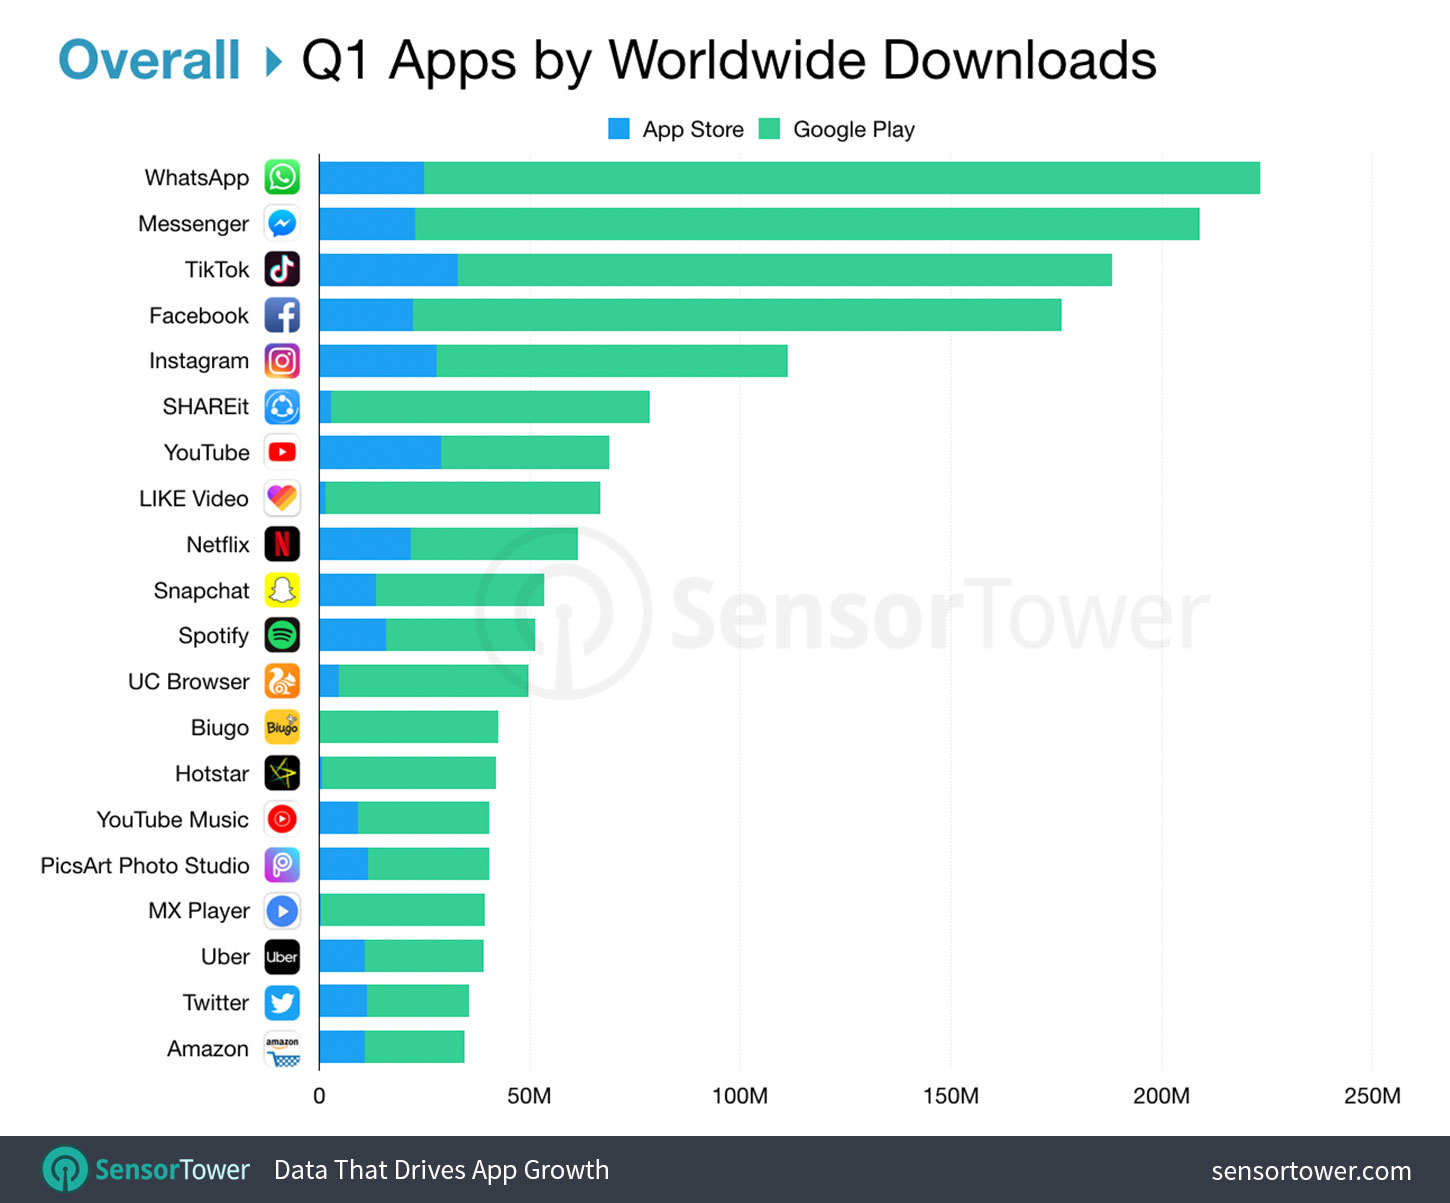 These Are the Top iPhone and Android Apps in Q1 2019